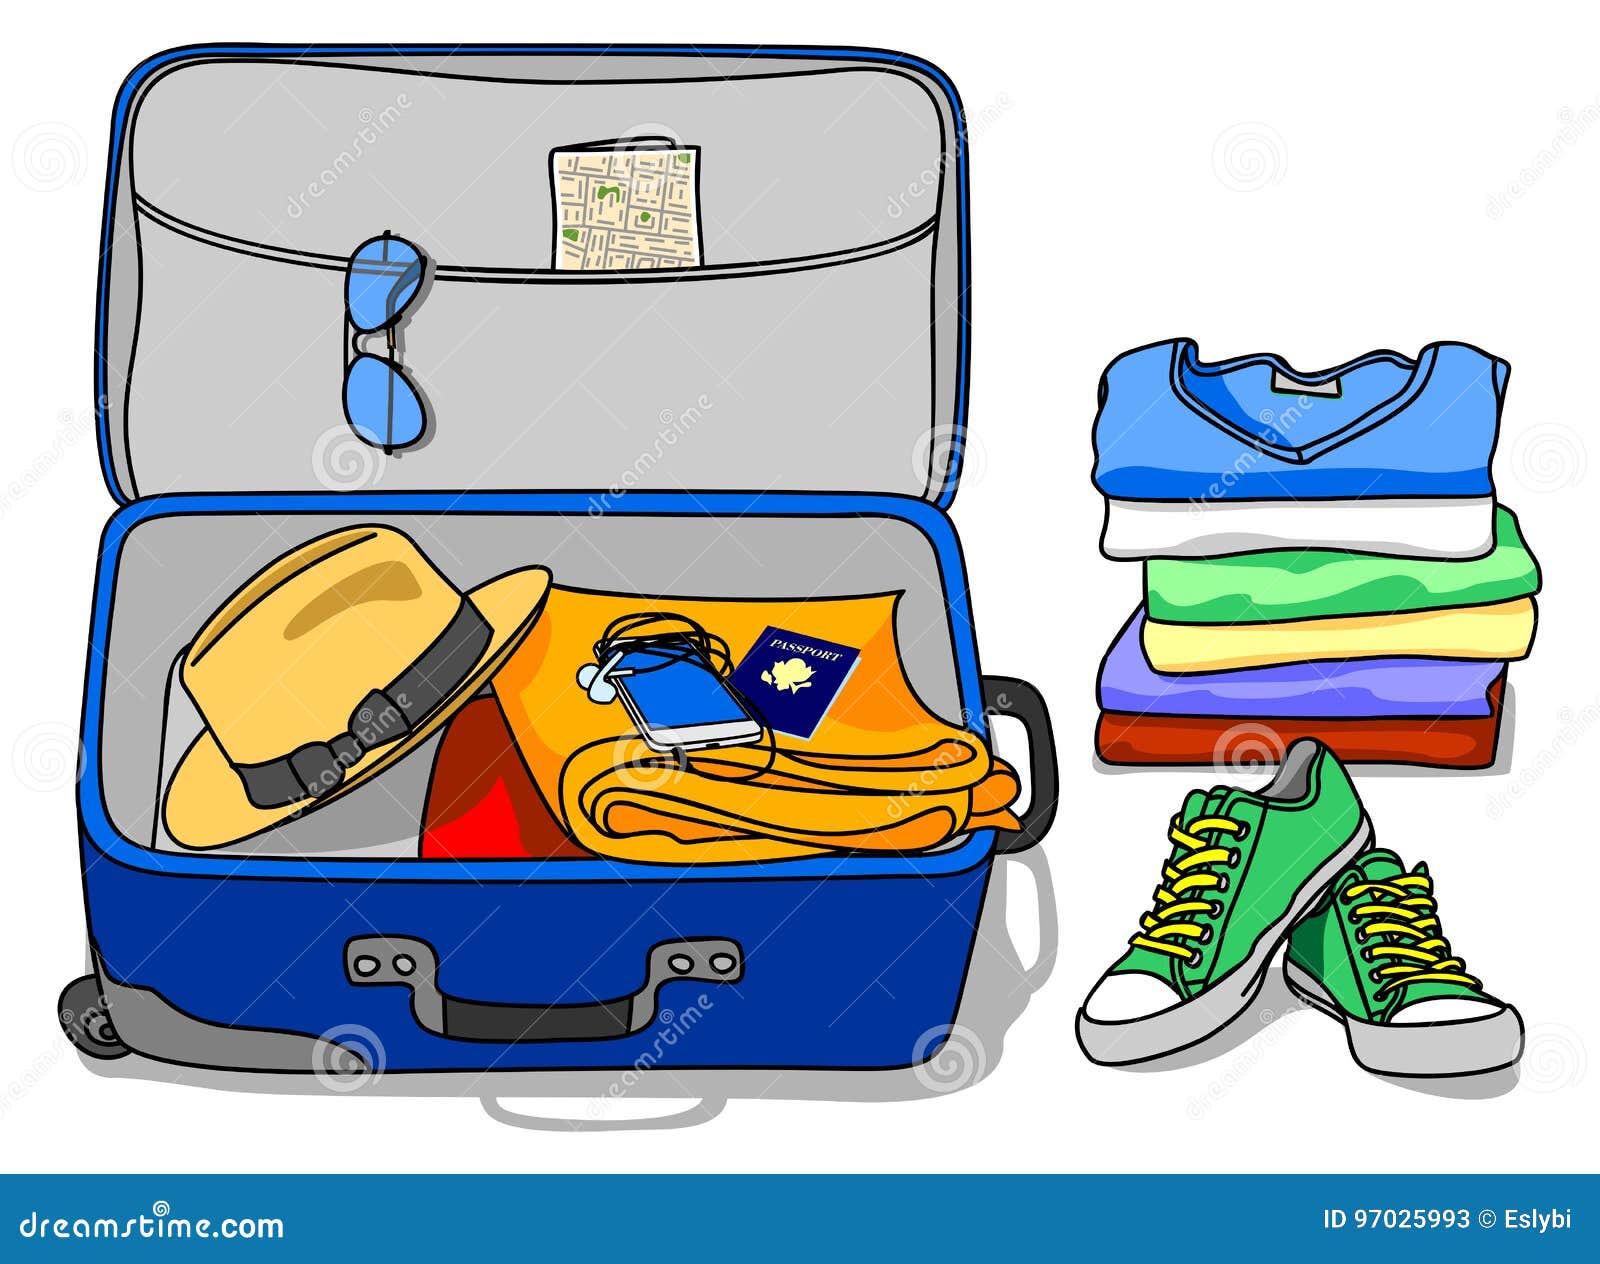 Summer travel: How to pack a carry-on (and nothing more!) this vacation |  Fox News